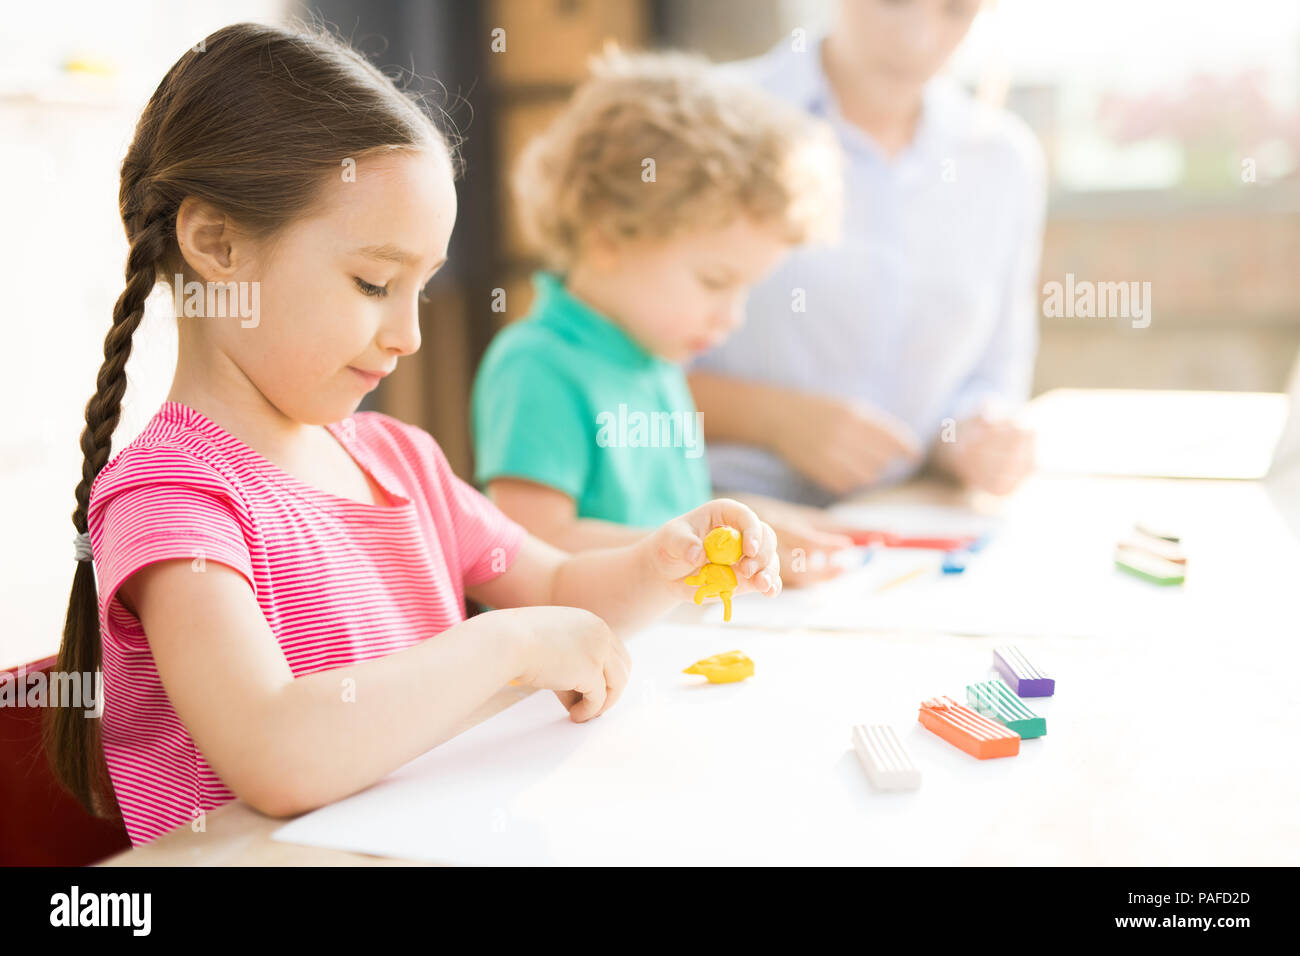 Little girl at art and craft lesson Stock Photo